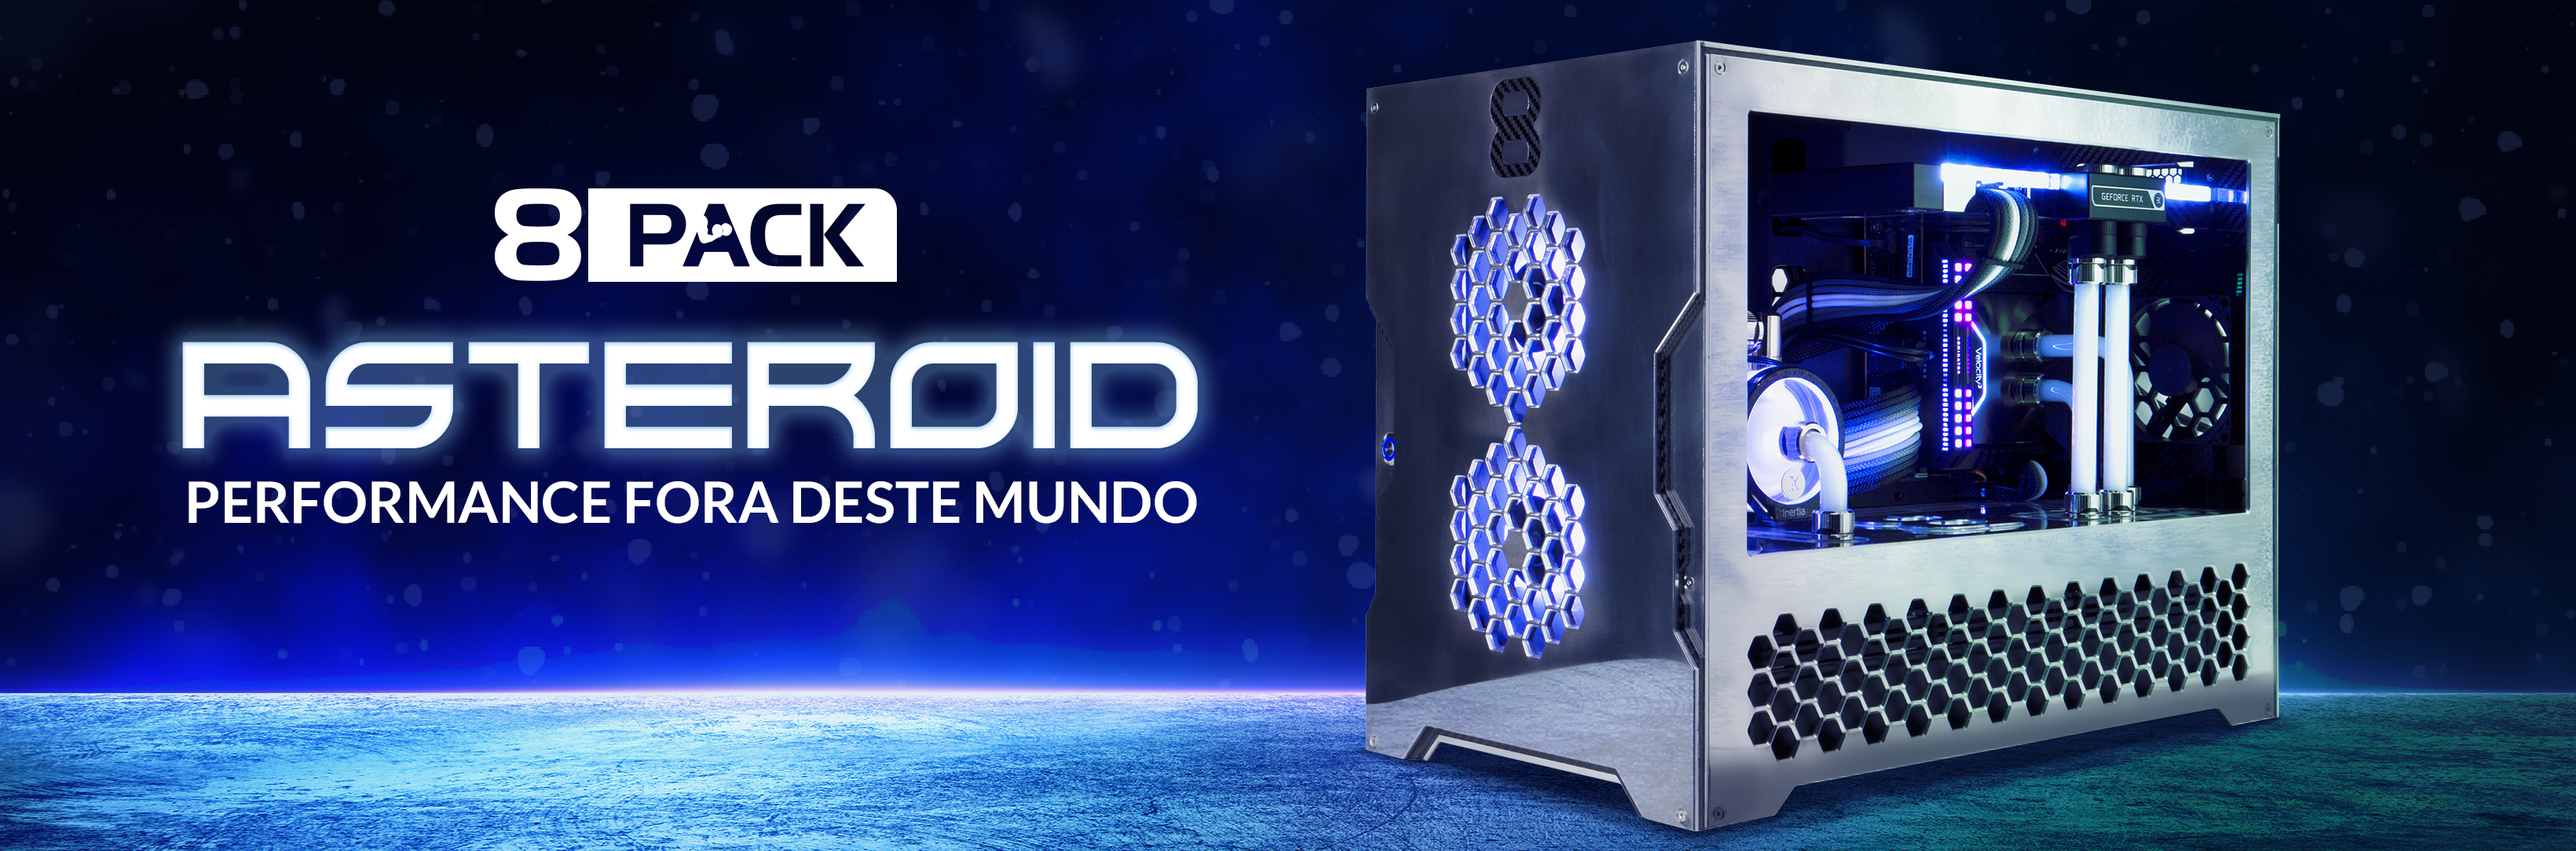 8PACK ASTEROID GAMING PC